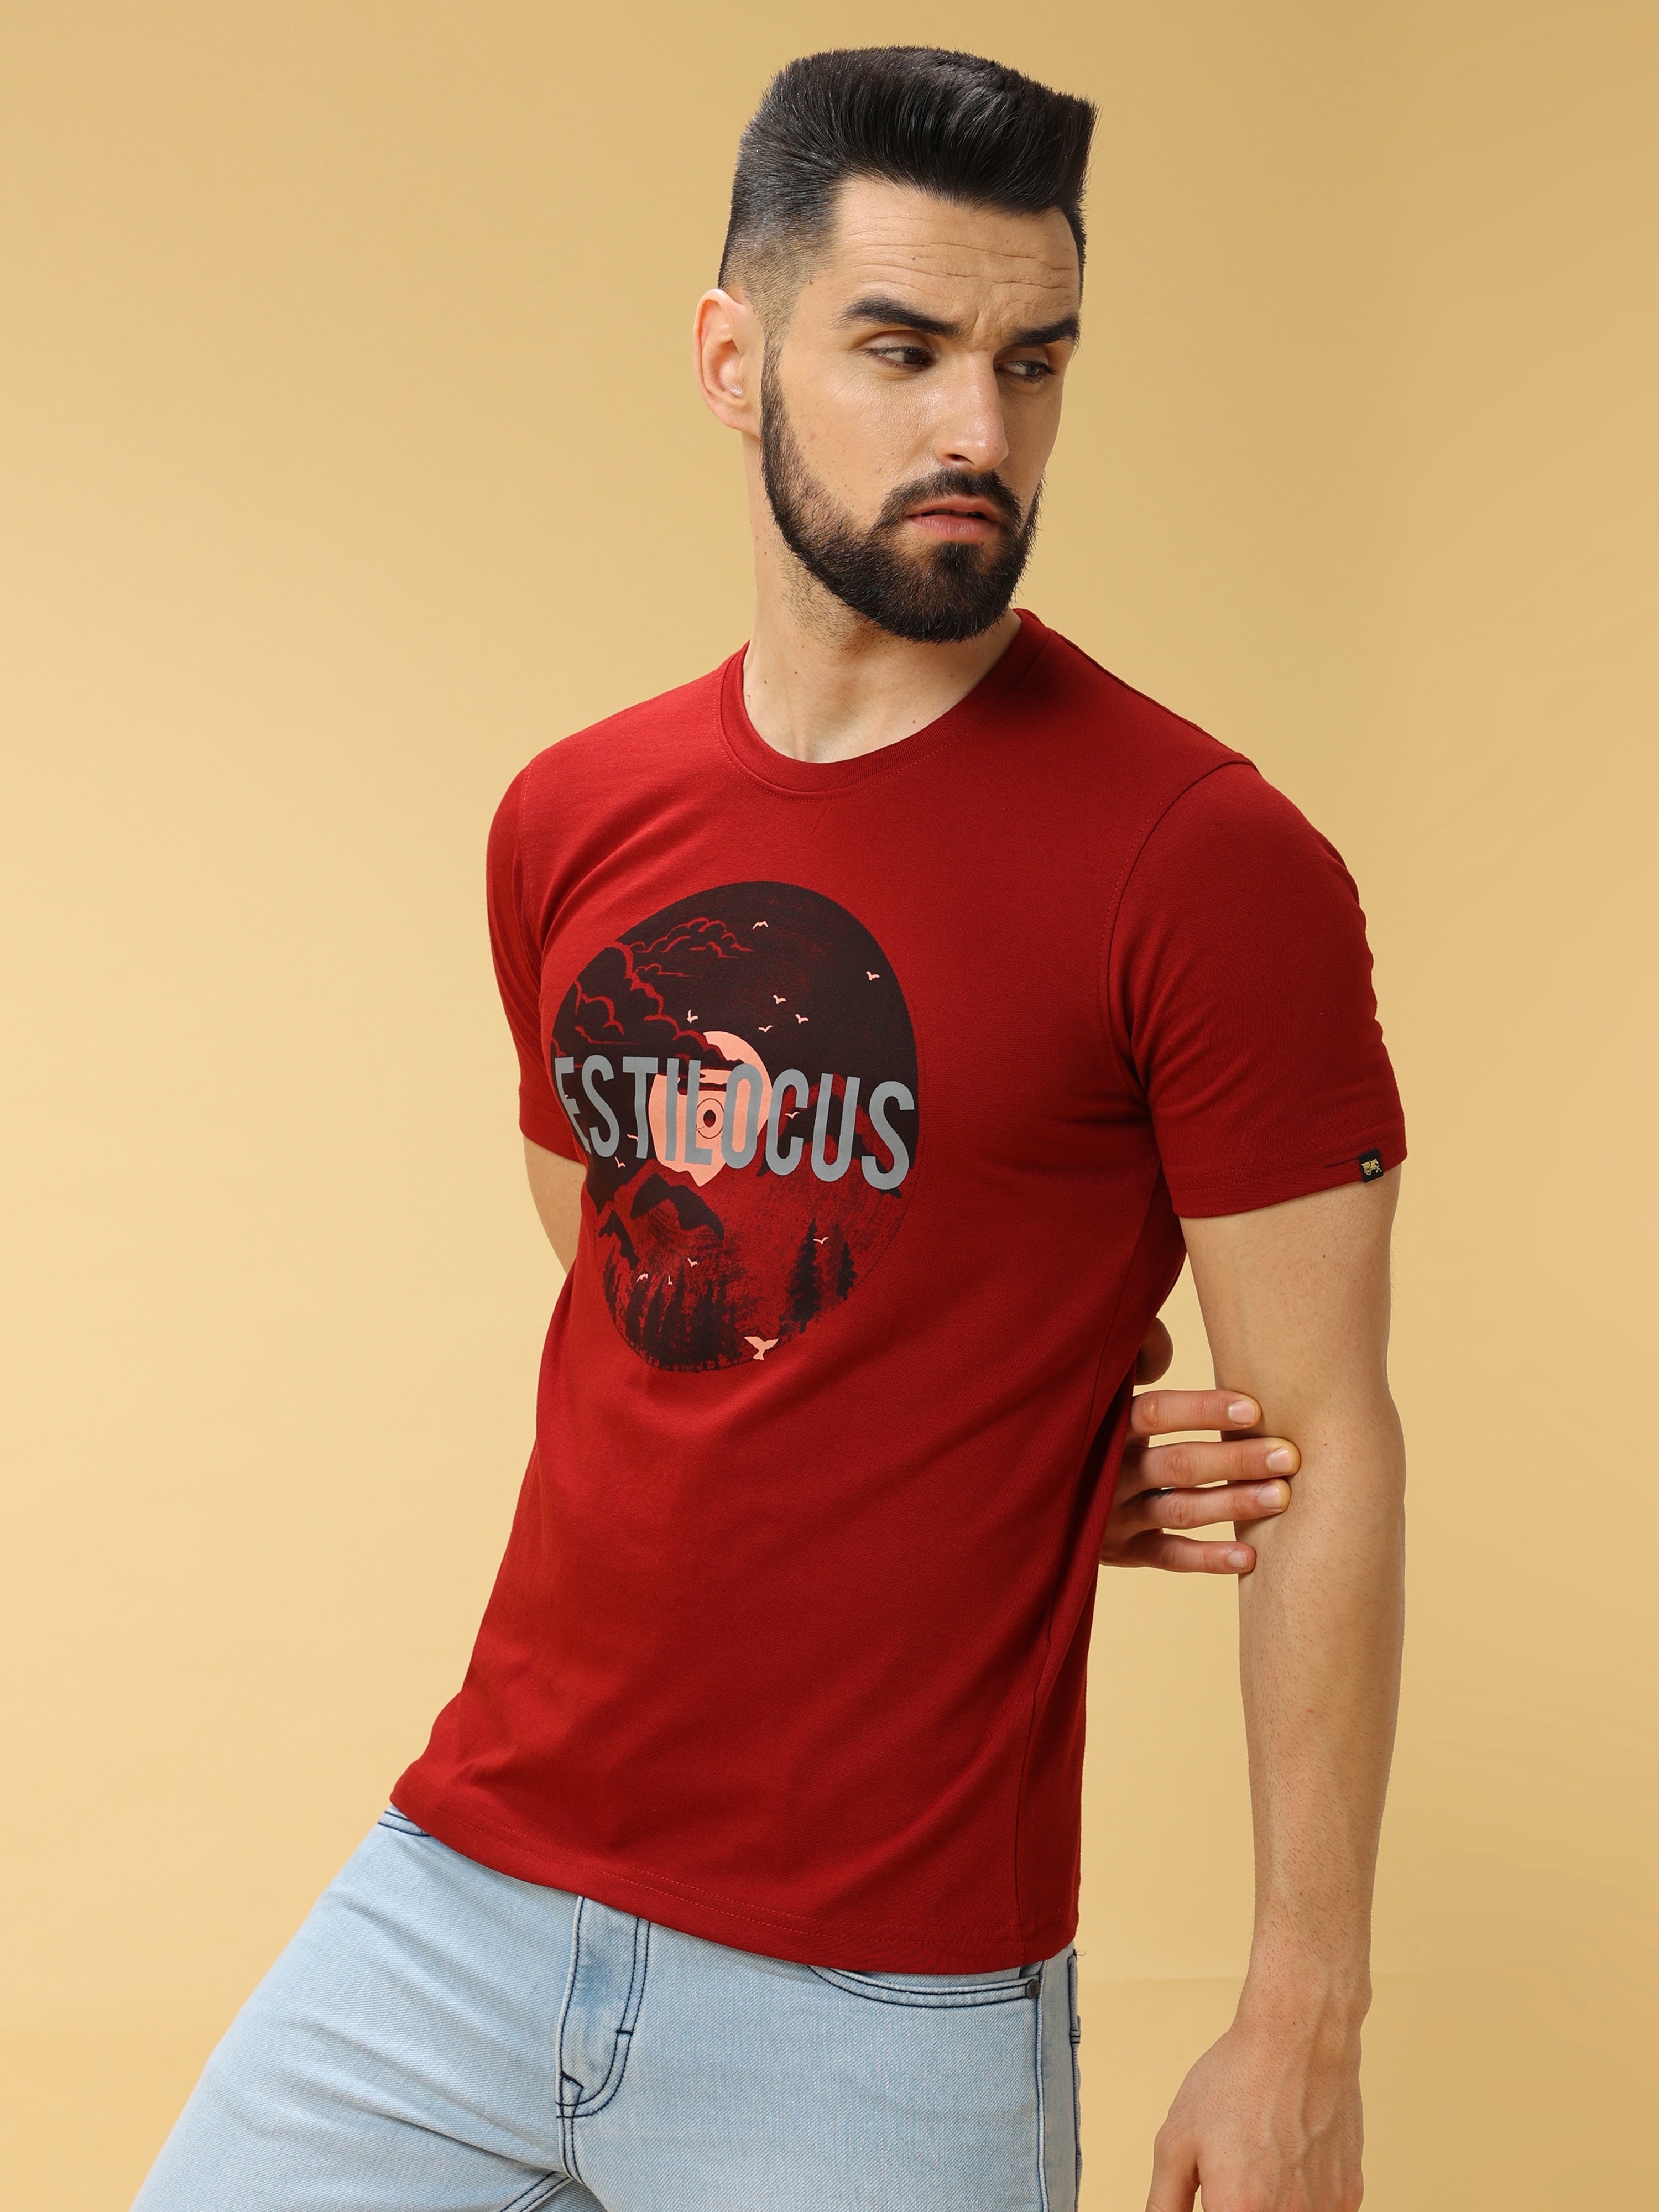 Round Navy/Pink Chest Print Crew Neck T-Shirt shop online at Estilocus. This pure cotton printed T-shirt is a stylish go-to for laidback days. Cut in a comfy regular fit. • 100% Cotton knitted interlock 190GSM• Bio washed fabric• Round neck T-shirt • Half